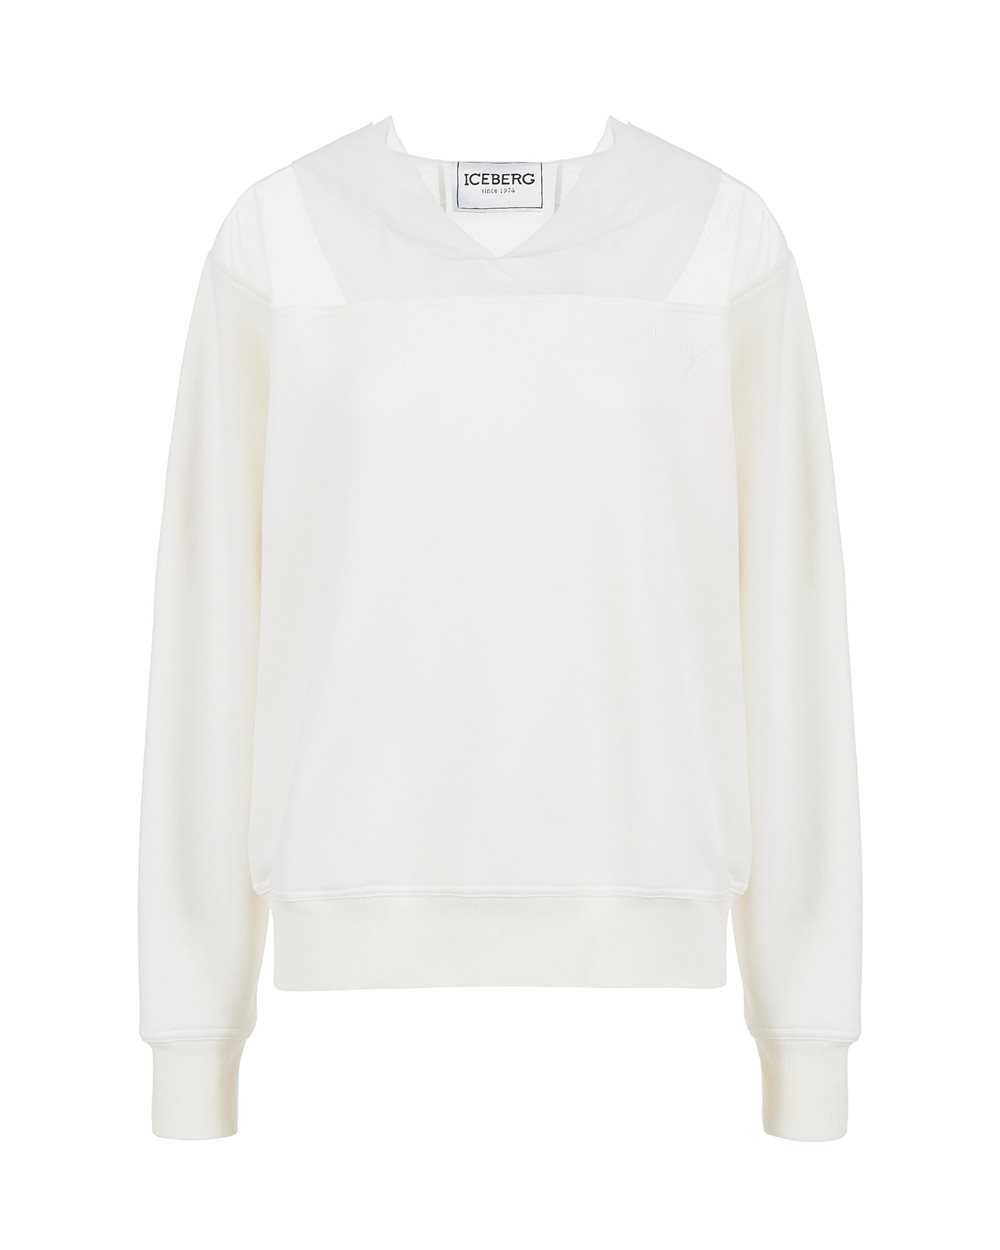 Sweatshirt with logo and organza details | Iceberg - Official Website